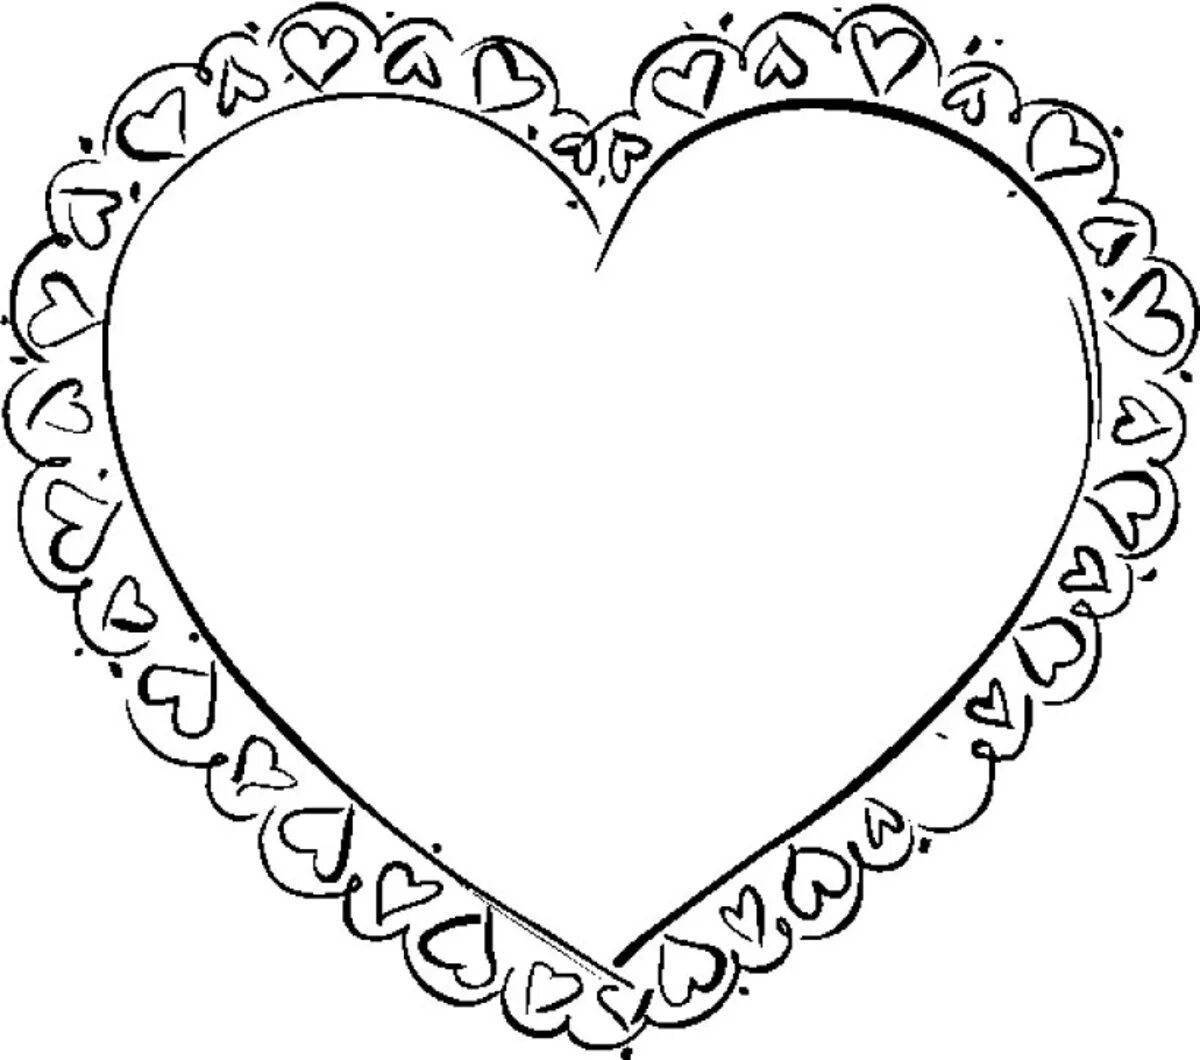 Gorgeous heart coloring book